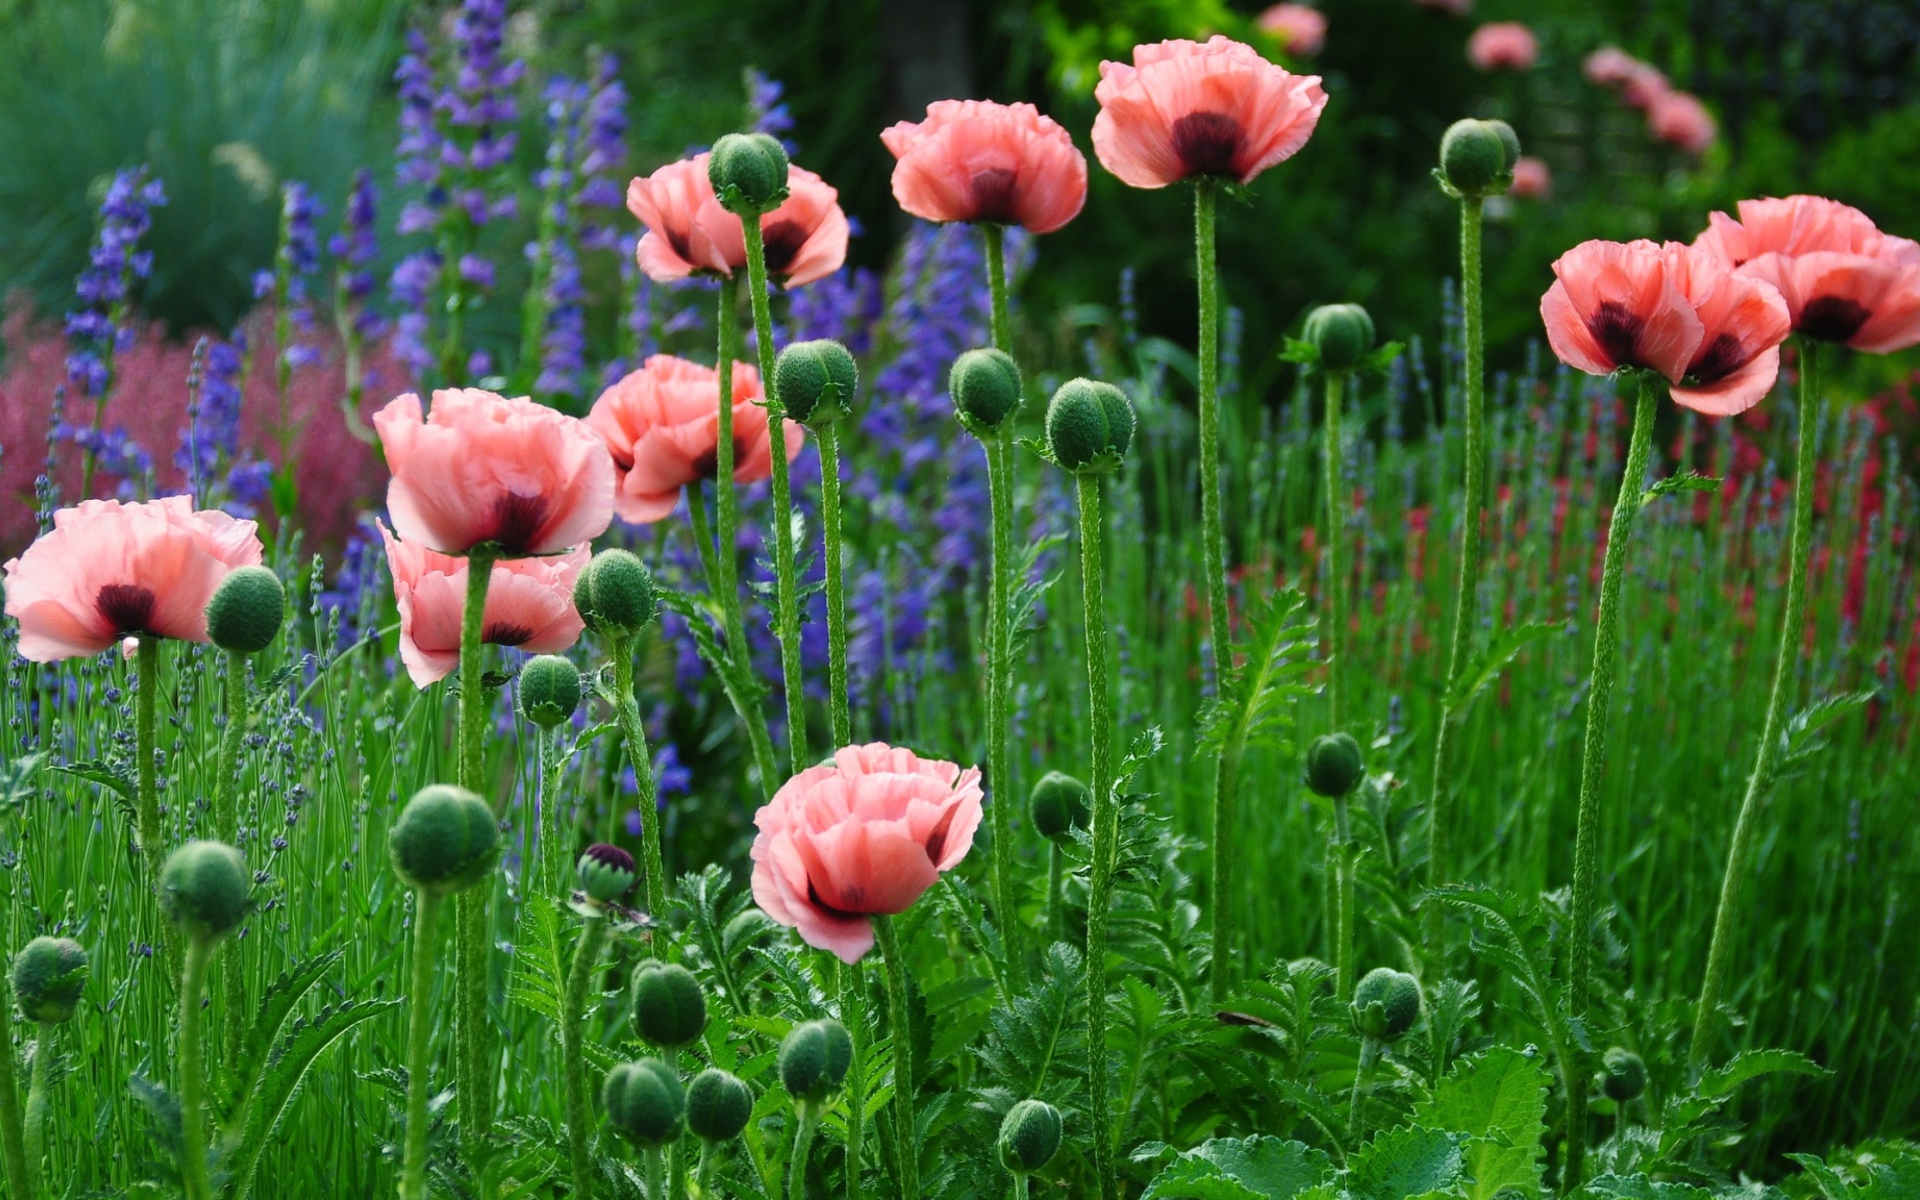 Delicate pink poppies in the field